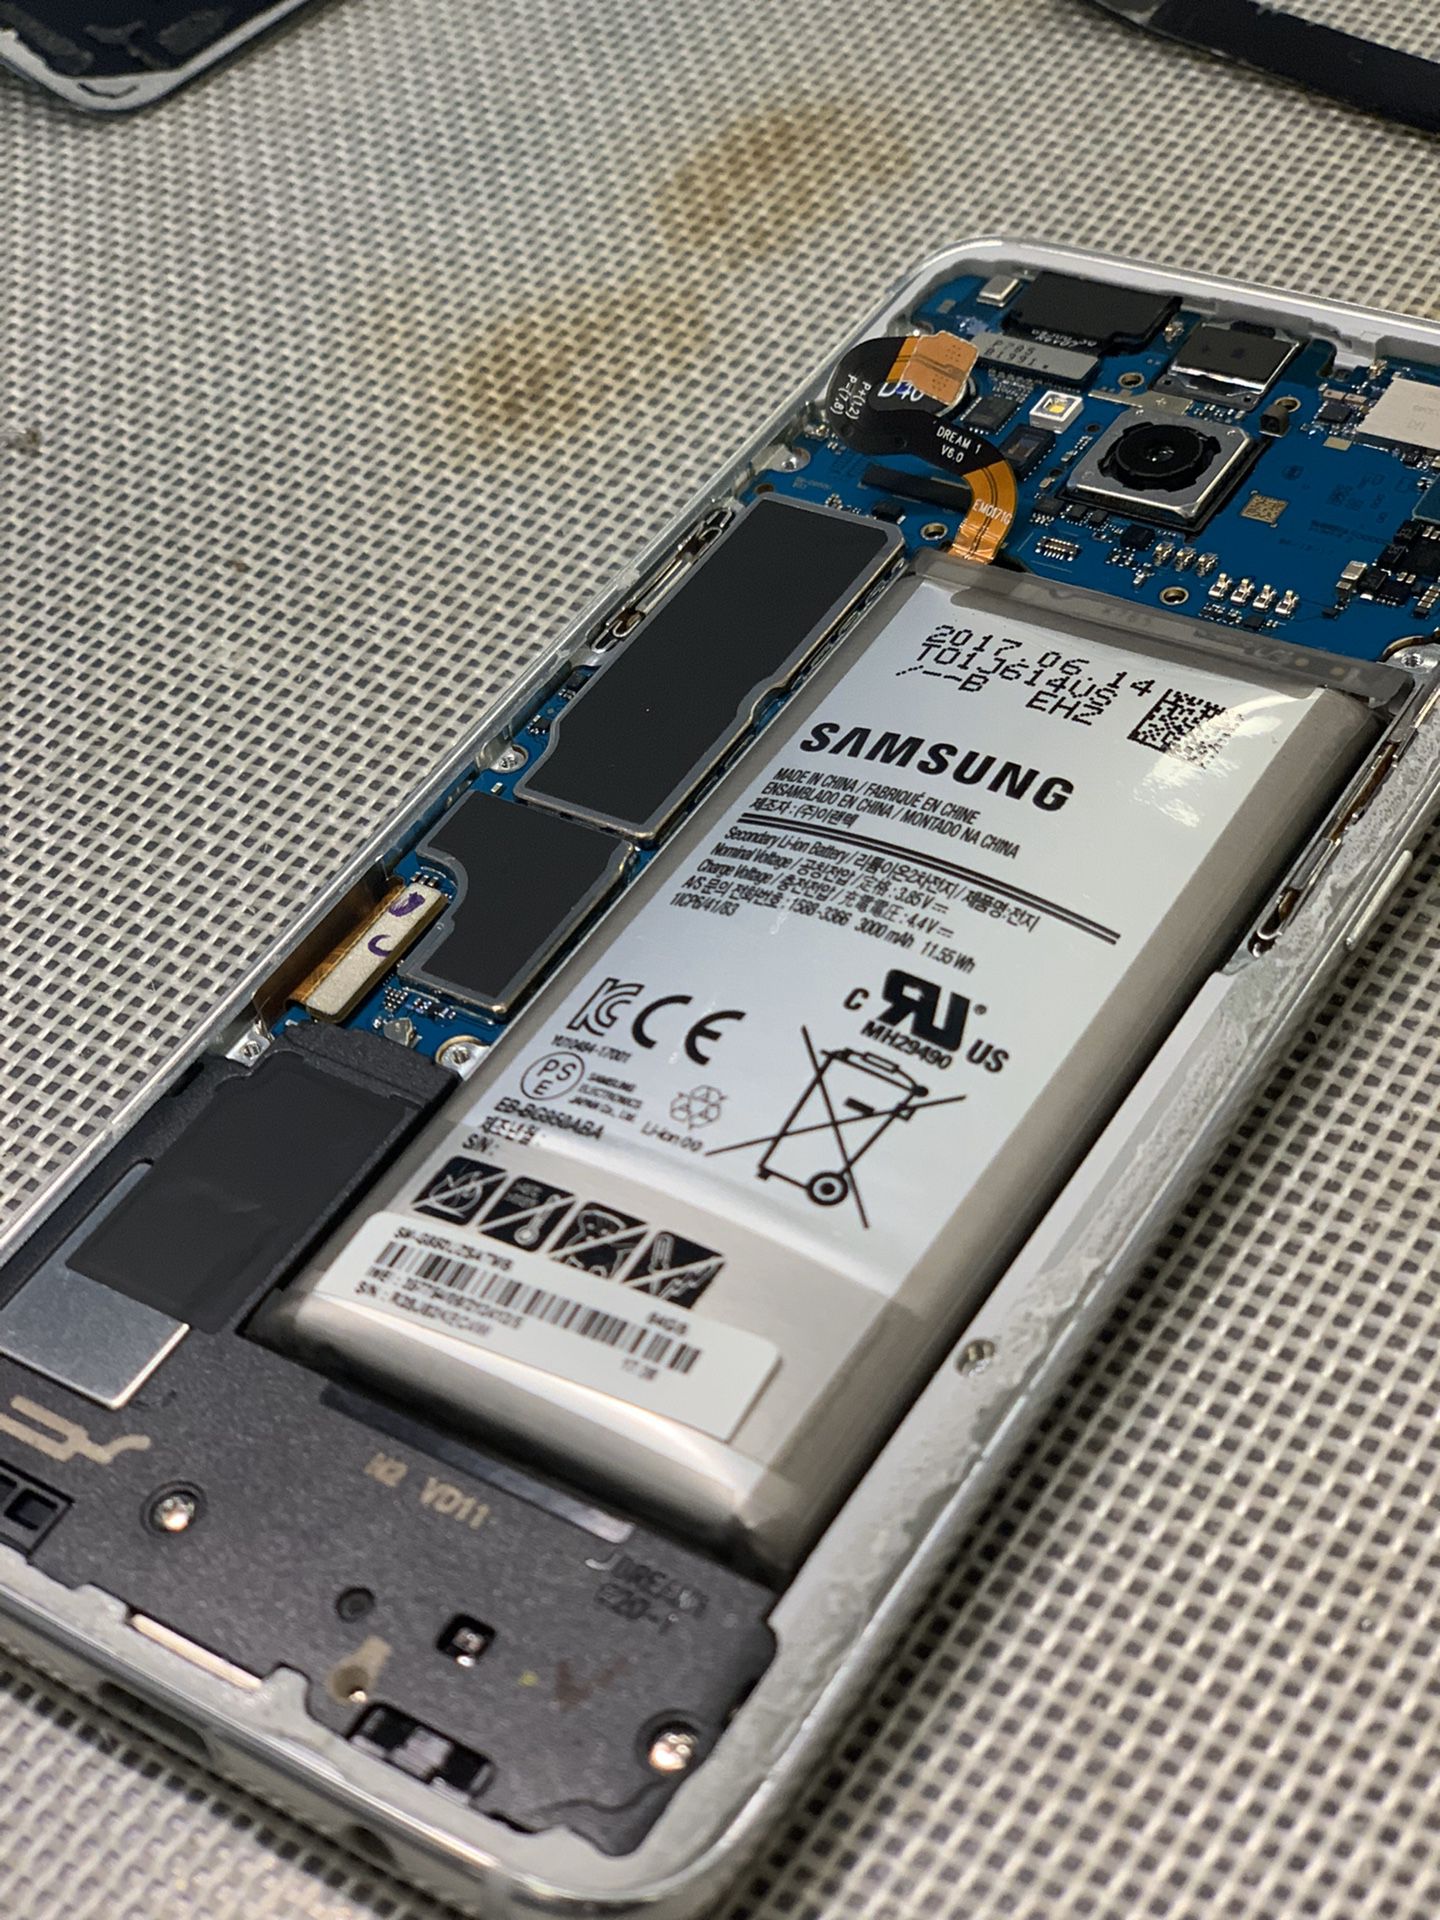 Battery replacement on Samsung phones